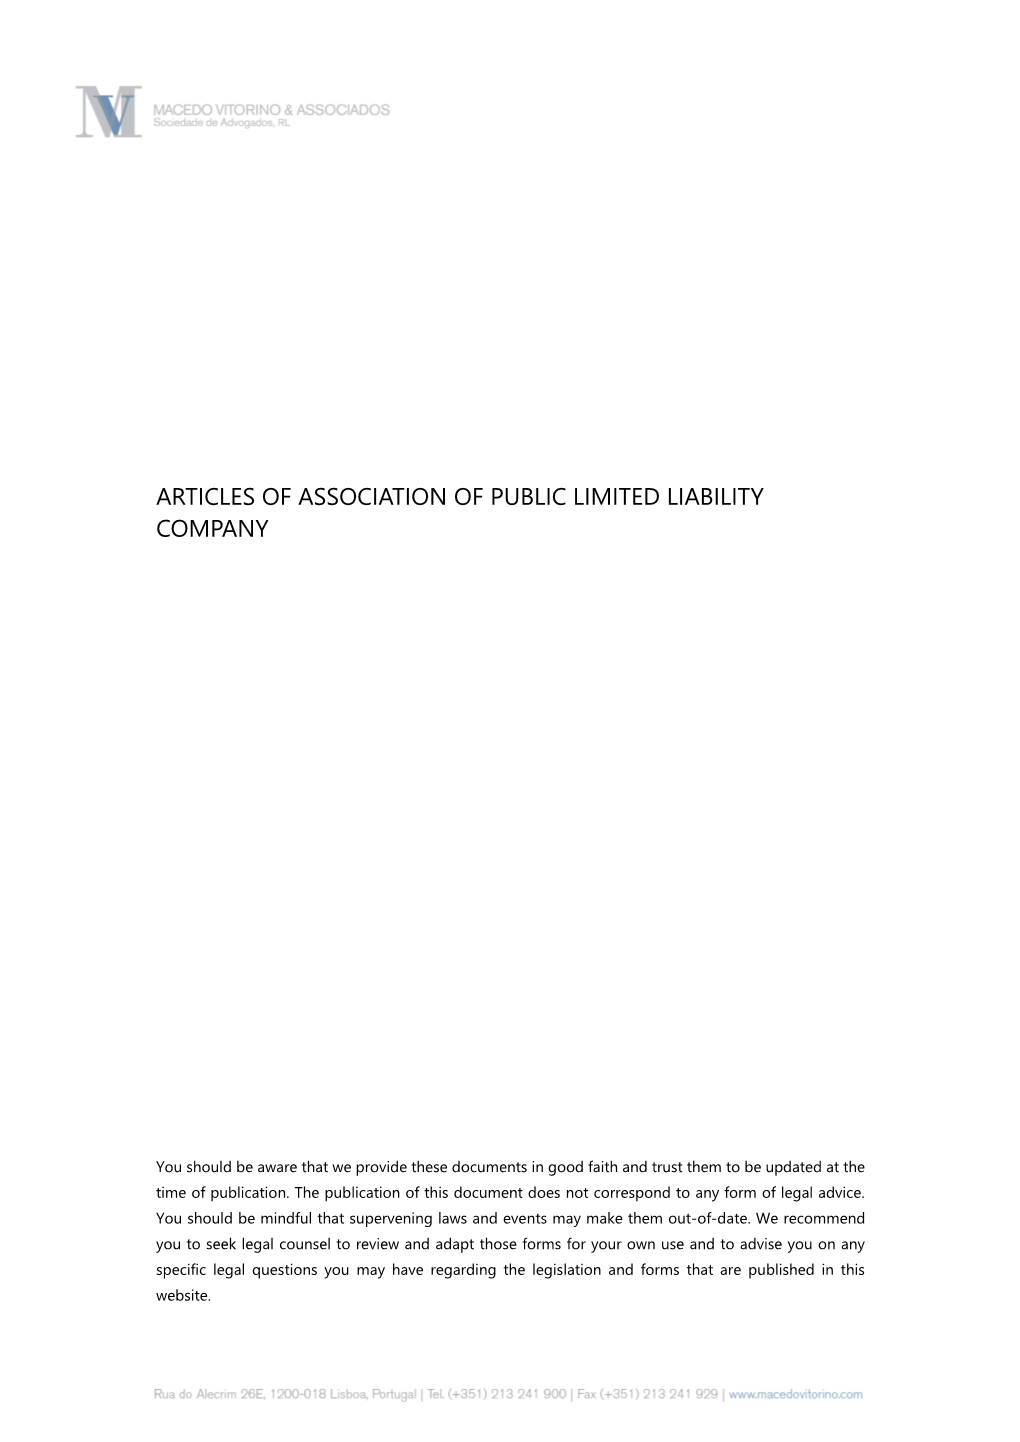 Articles of Association of Public Limited Liability Company